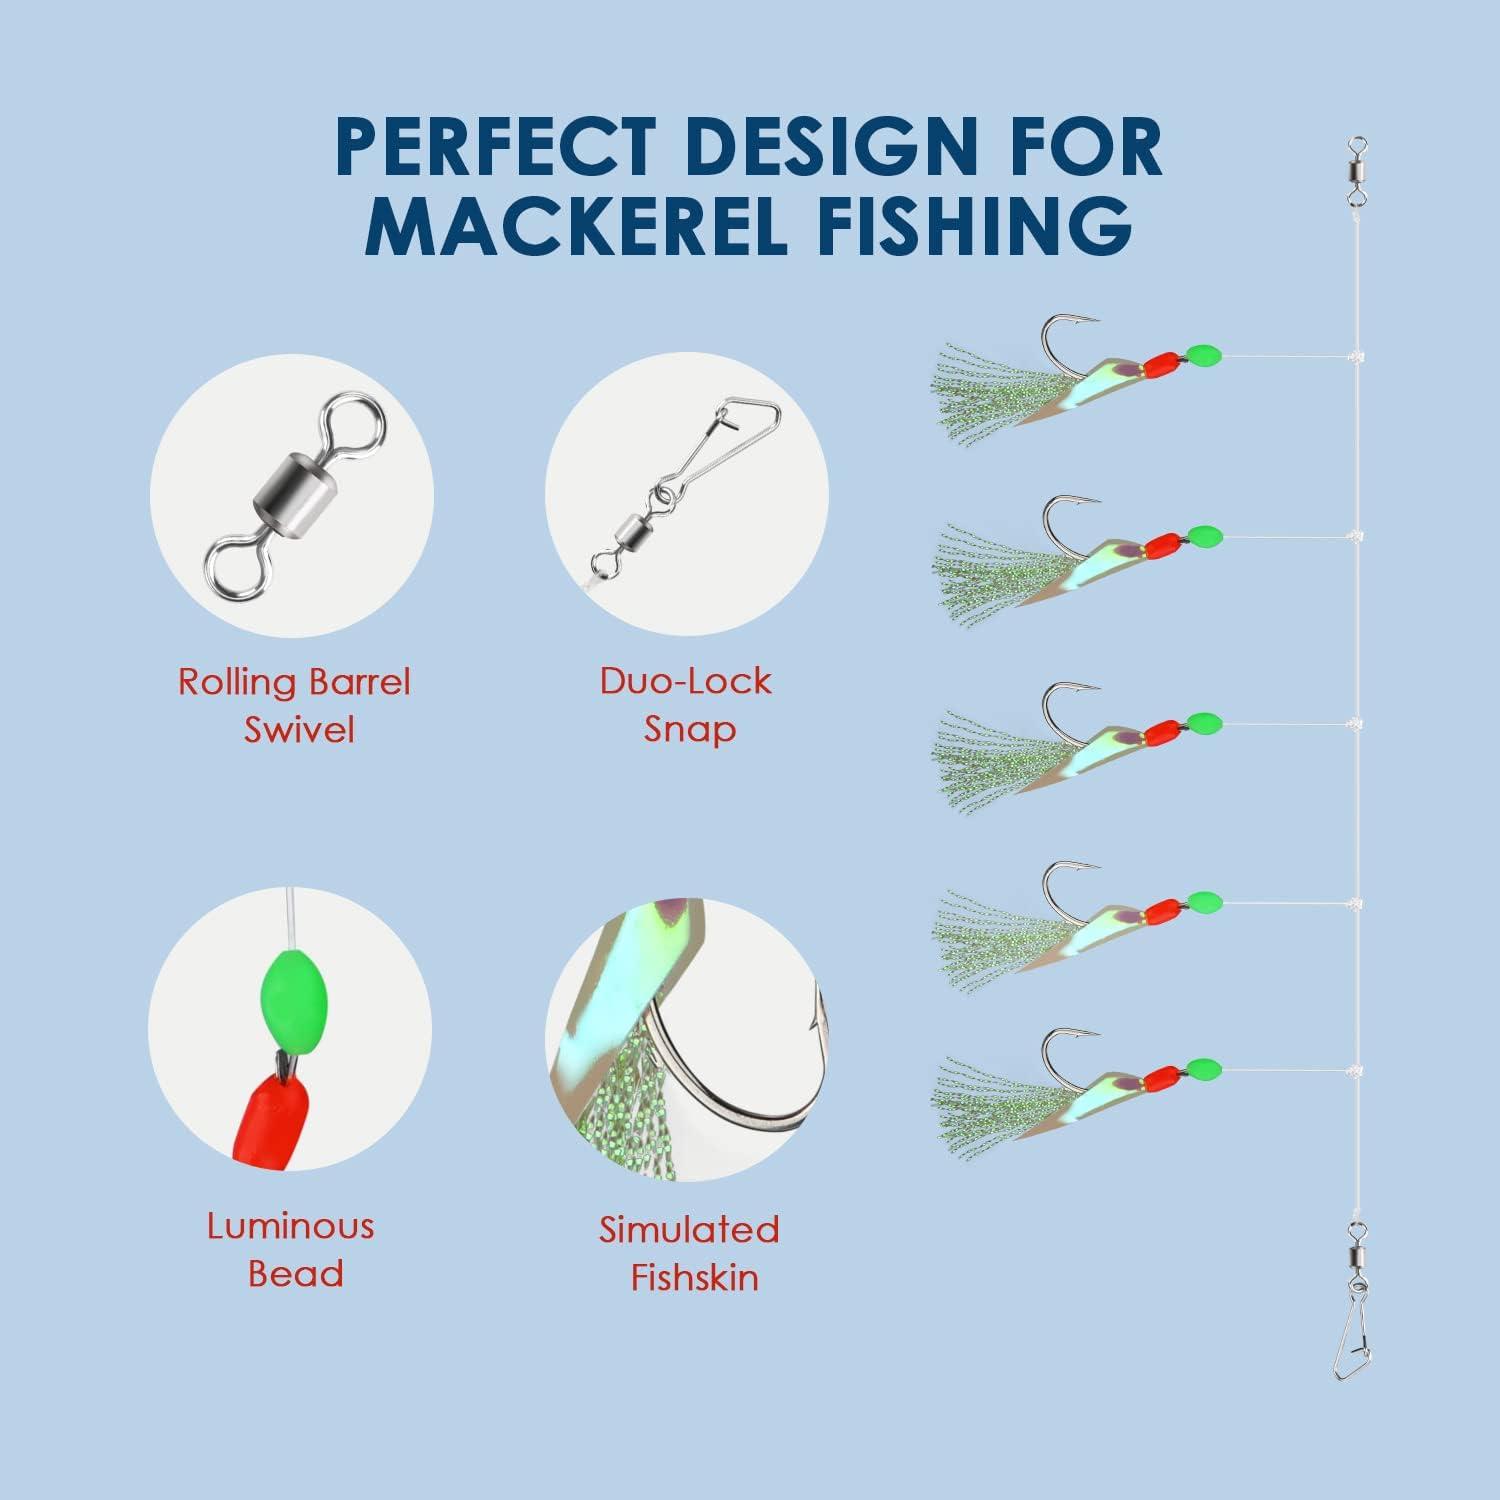 Rodeel Pre-tied Sea Fishing Rigs, 6 Pack / 36 Hooks Fishing Feathers, with  Luminous Beads Glowing Tail and Simulated Fish-skin Flasher, Attractor for  Mackerel, Herring, Bass, Cod - For Day Use 